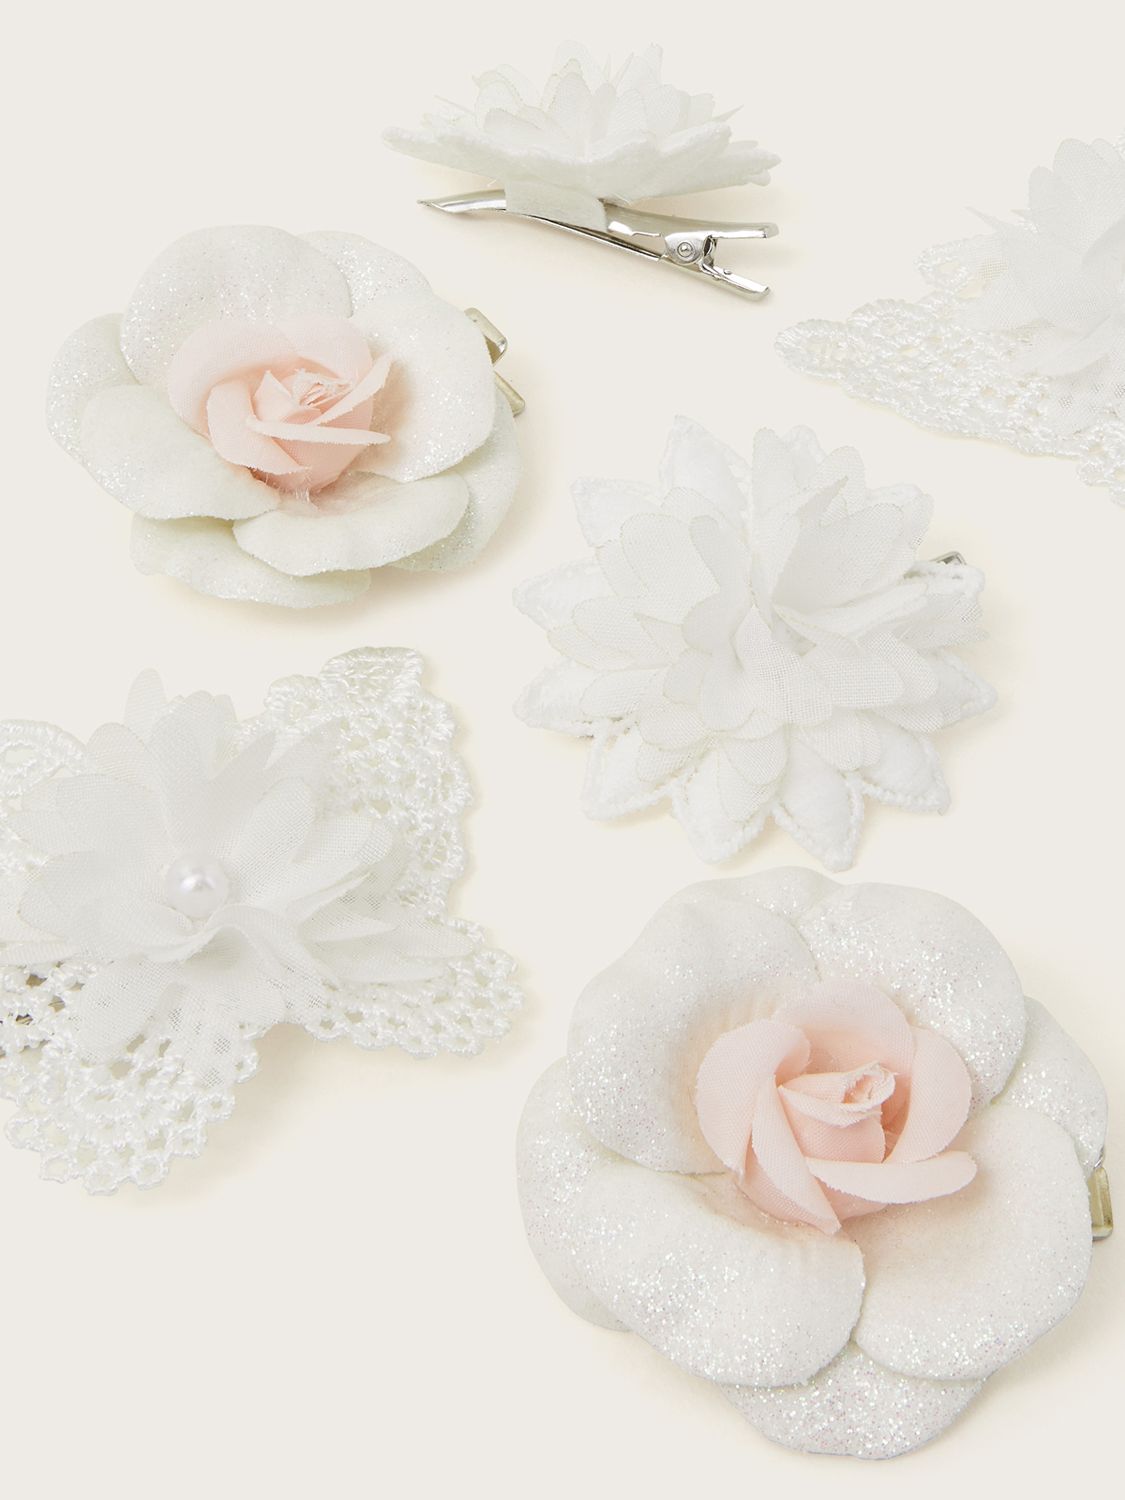 Monsoon Kids' Bridesmaid Flower & Butterfly Hair Clips, Pack of Six, Ivory, One Size